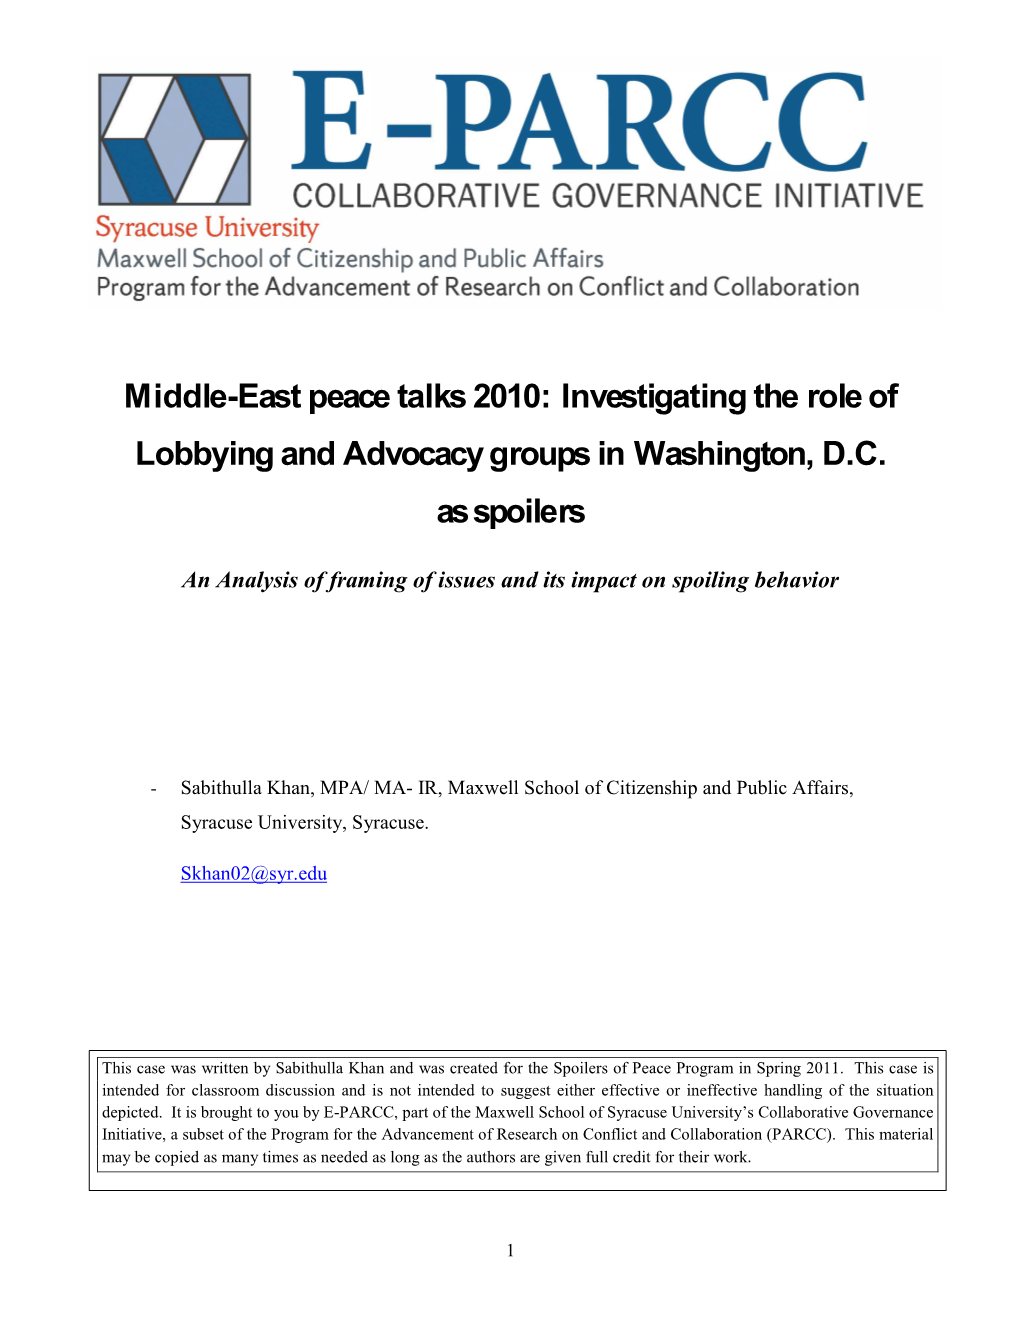 Middle-East Peace Talks 2010: Investigating the Role of Lobbying and Advocacy Groups in Washington, D.C